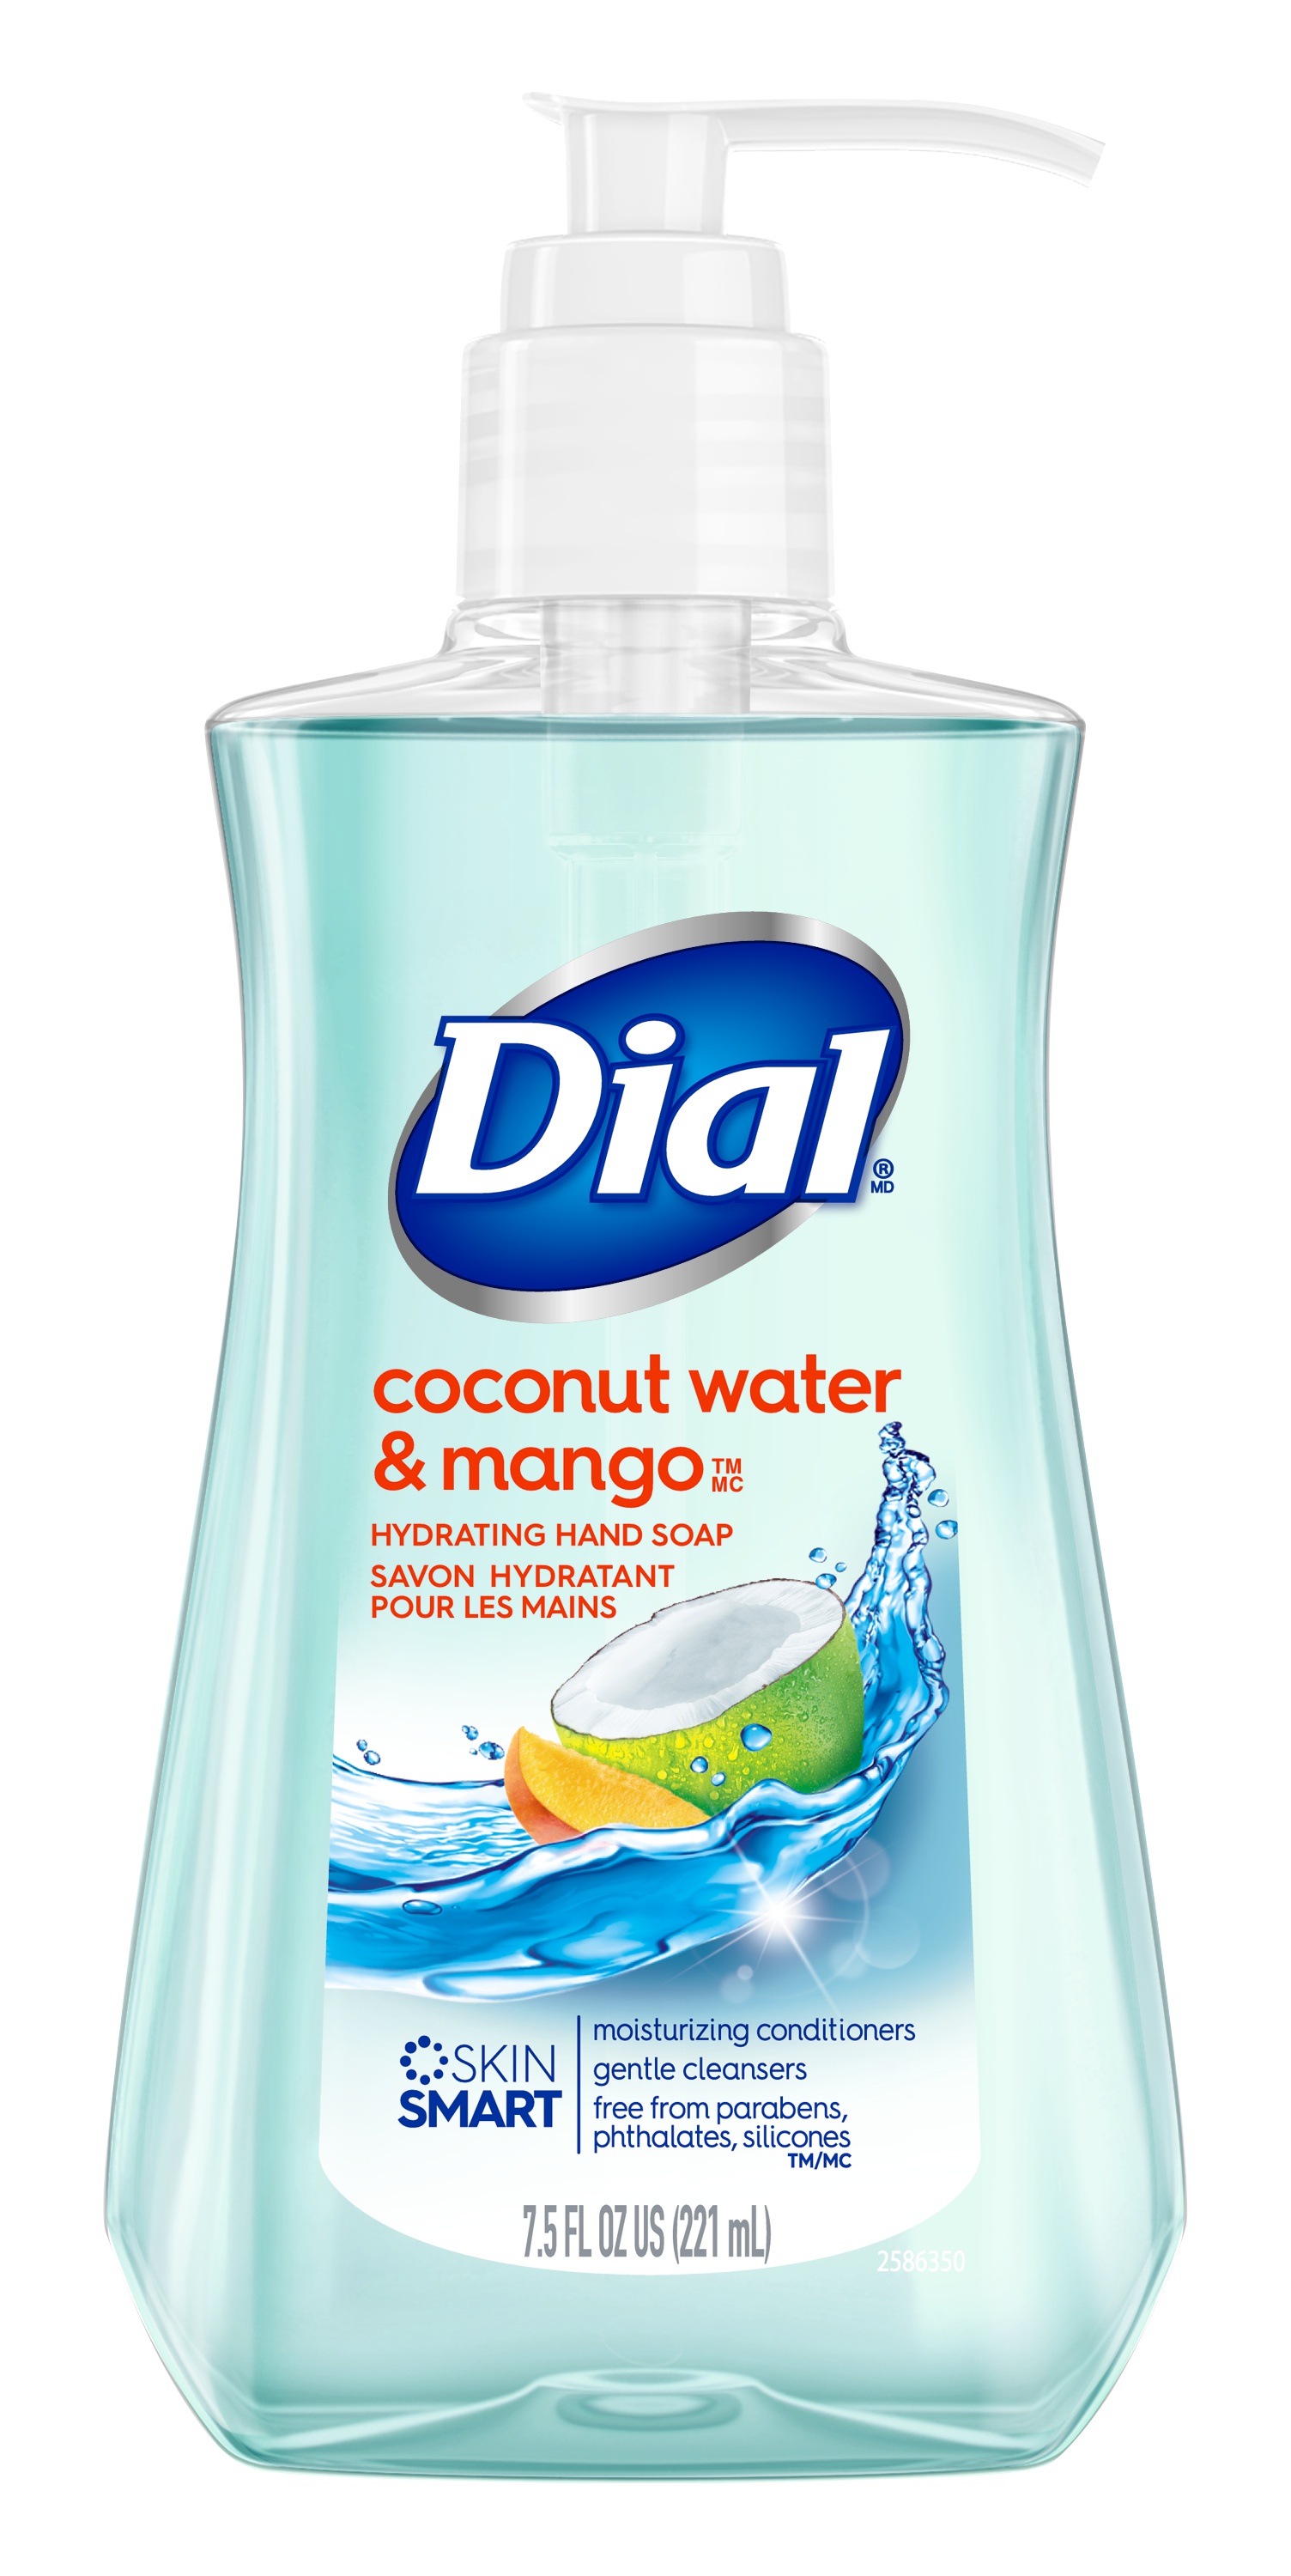 Dial Coconut Water & Mango Hydrating Hand Soap